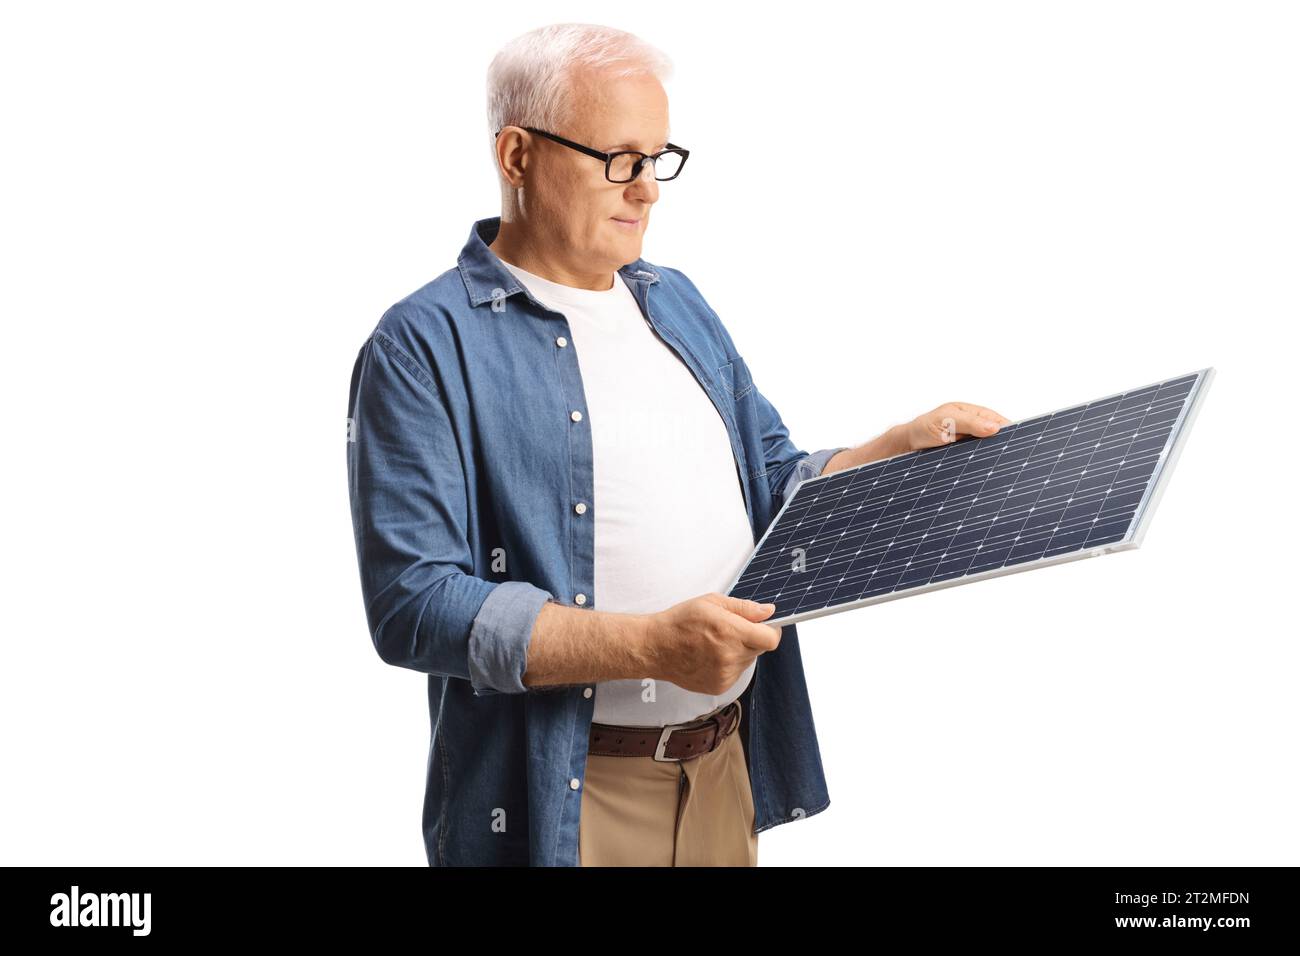 Causal mature man looking at a solar panel isolated on white background Stock Photo